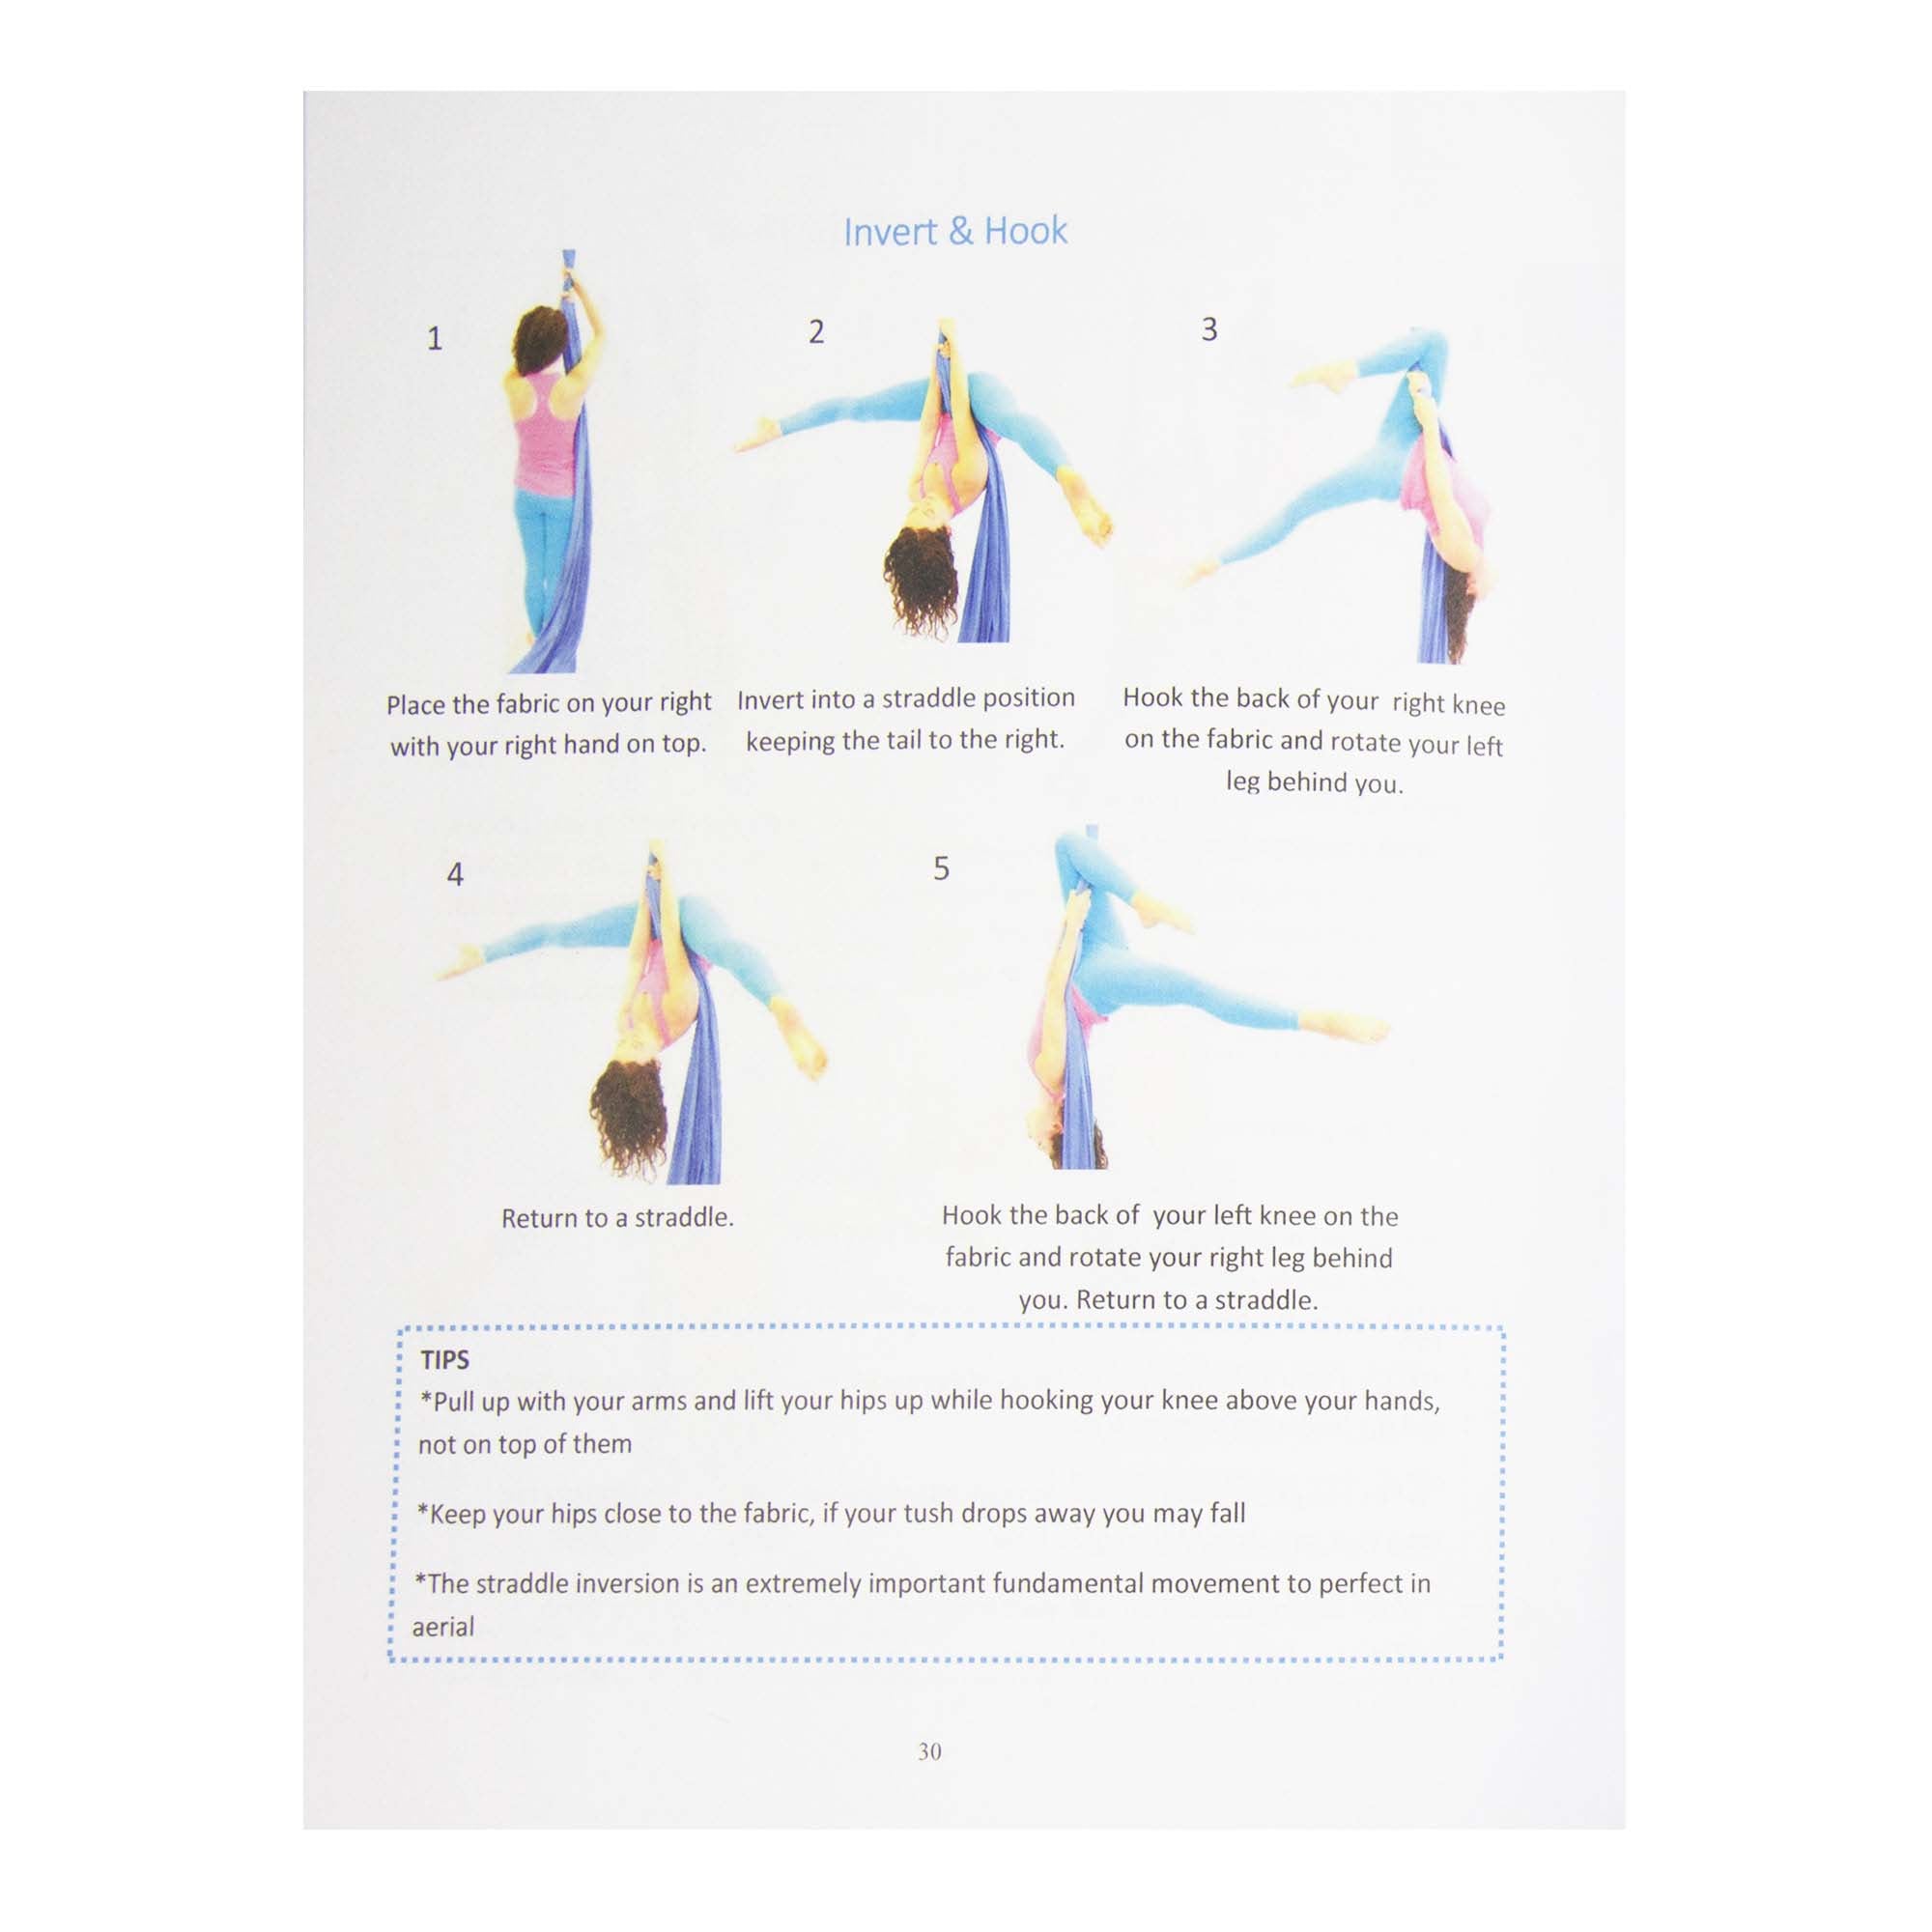 Beginner's Guide to Aerial Silk example page showing invert and hook with illustrations, text, and tips